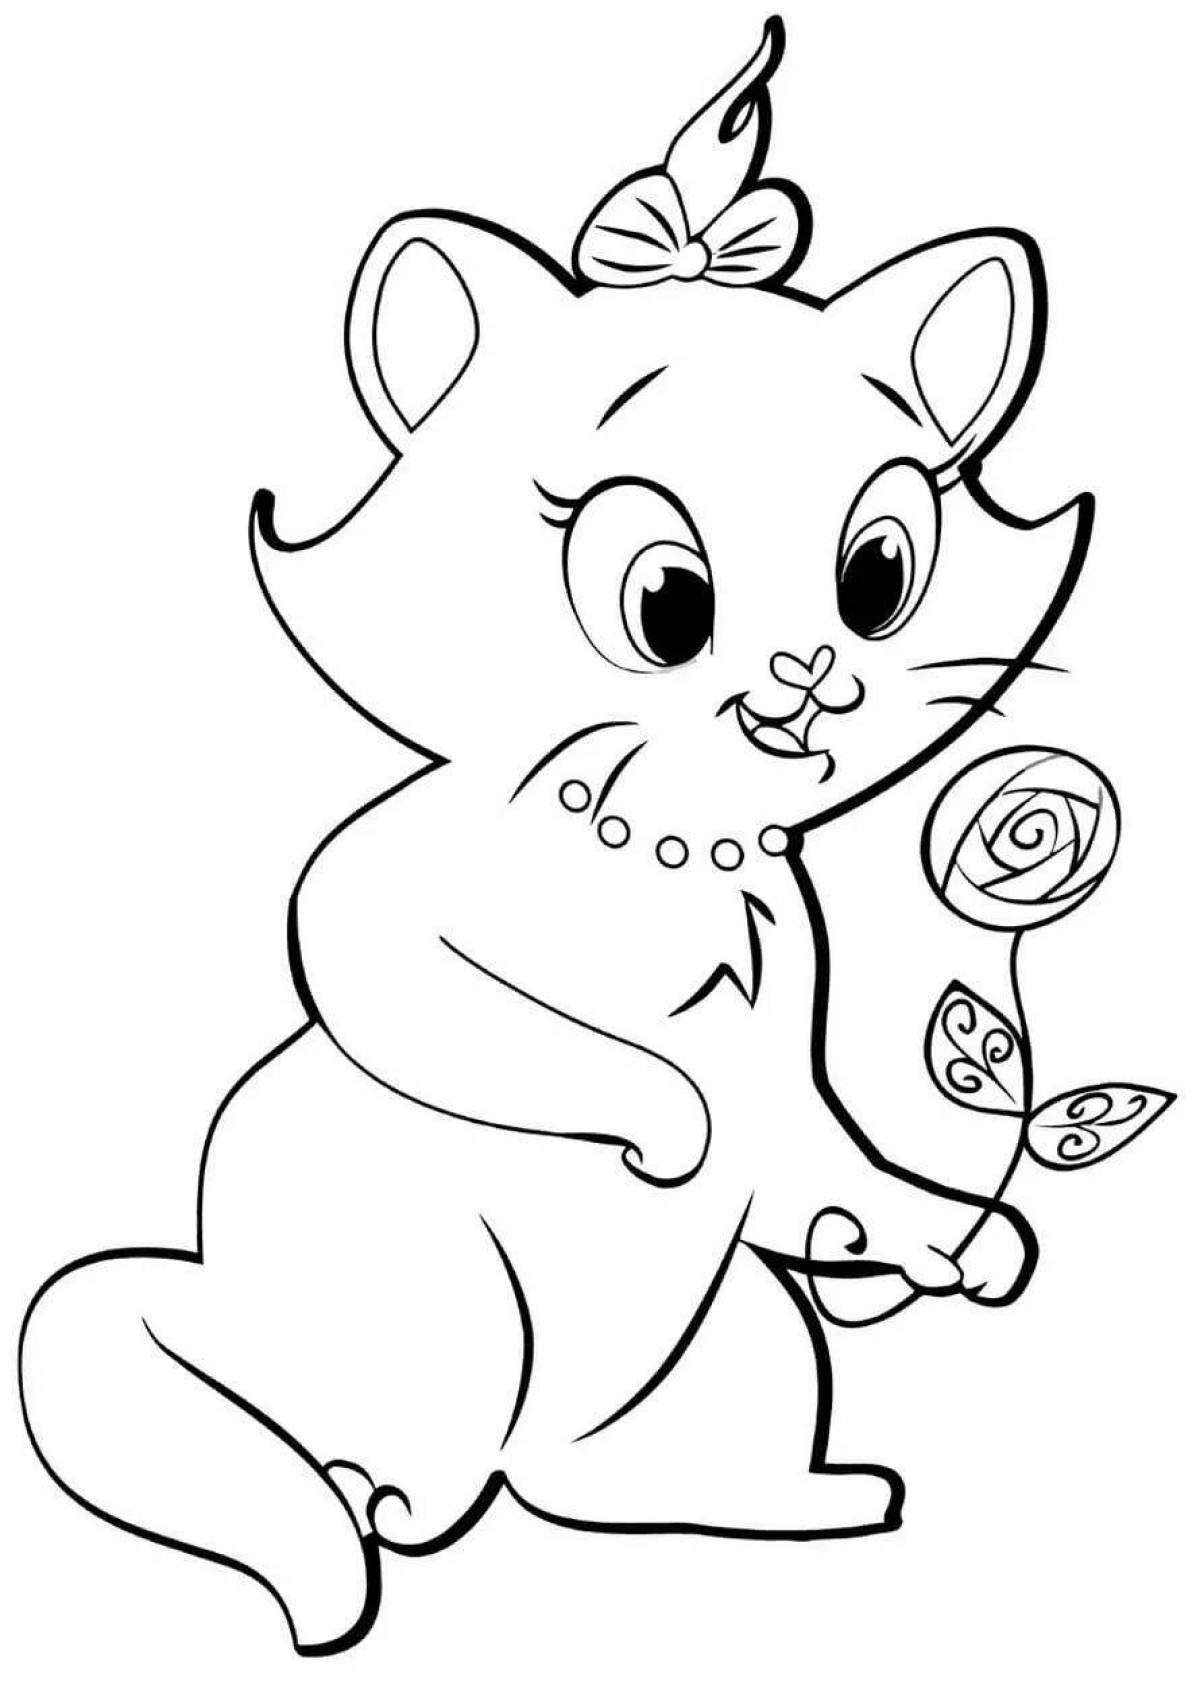 Adorable kittens coloring book for children 6-7 years old